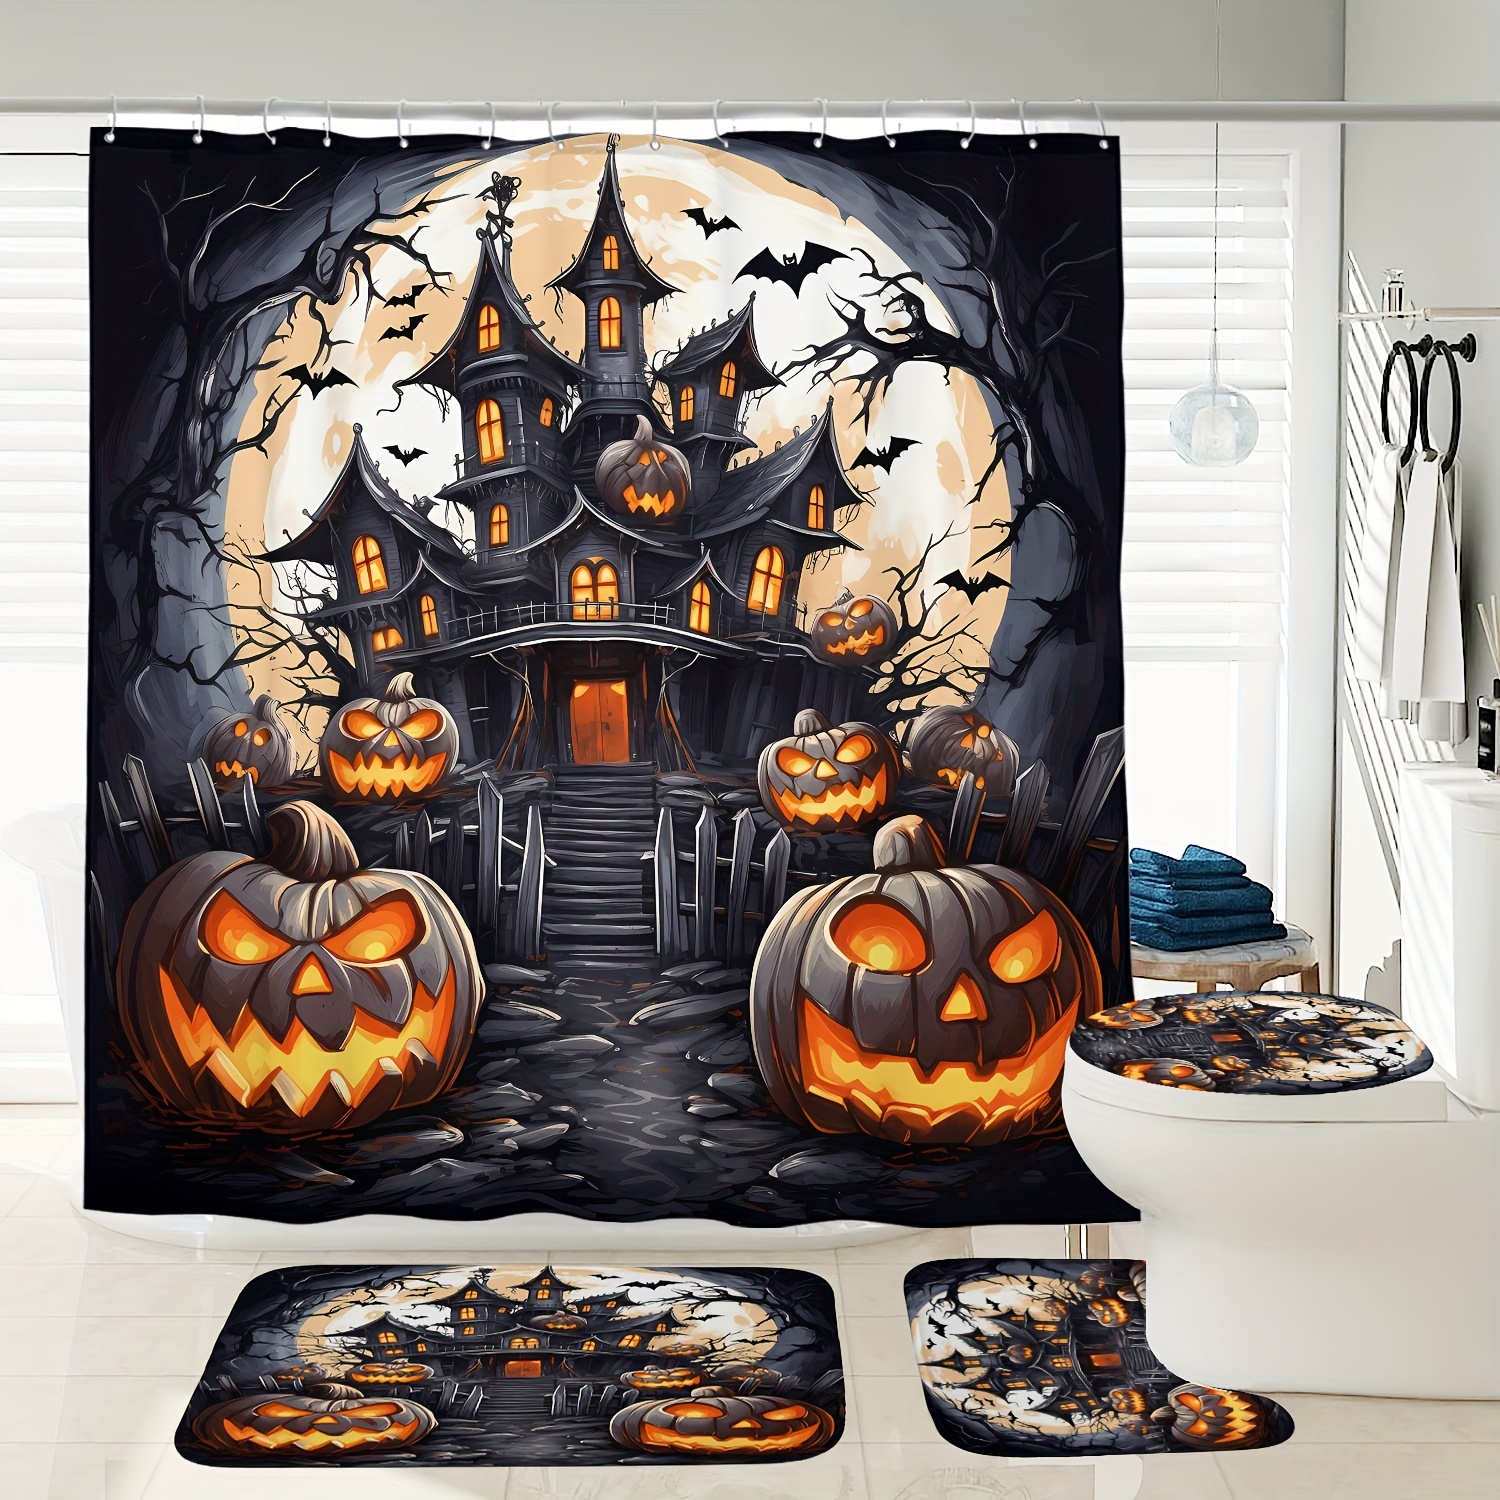 

Castle Halloween Bathroom Set: Includes 1/3/4 Piece Shower Curtain, Toilet Seat Cover, And Bath Mats With 12 Plastic Hooks - Perfect For A Frighteningly Festive Home!